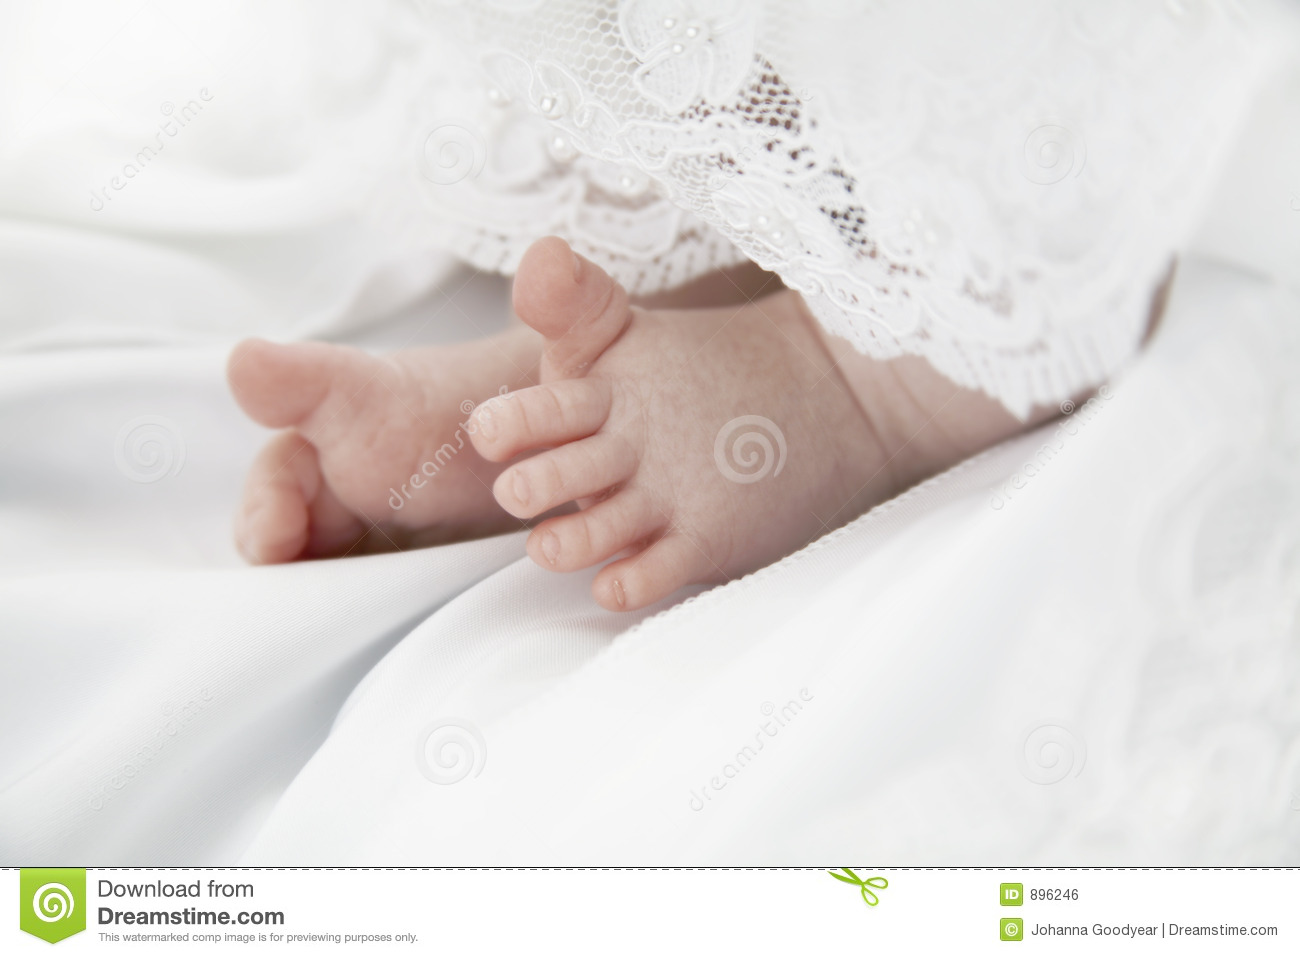 Baby Toes Royalty Free Stock Image   Image  896246